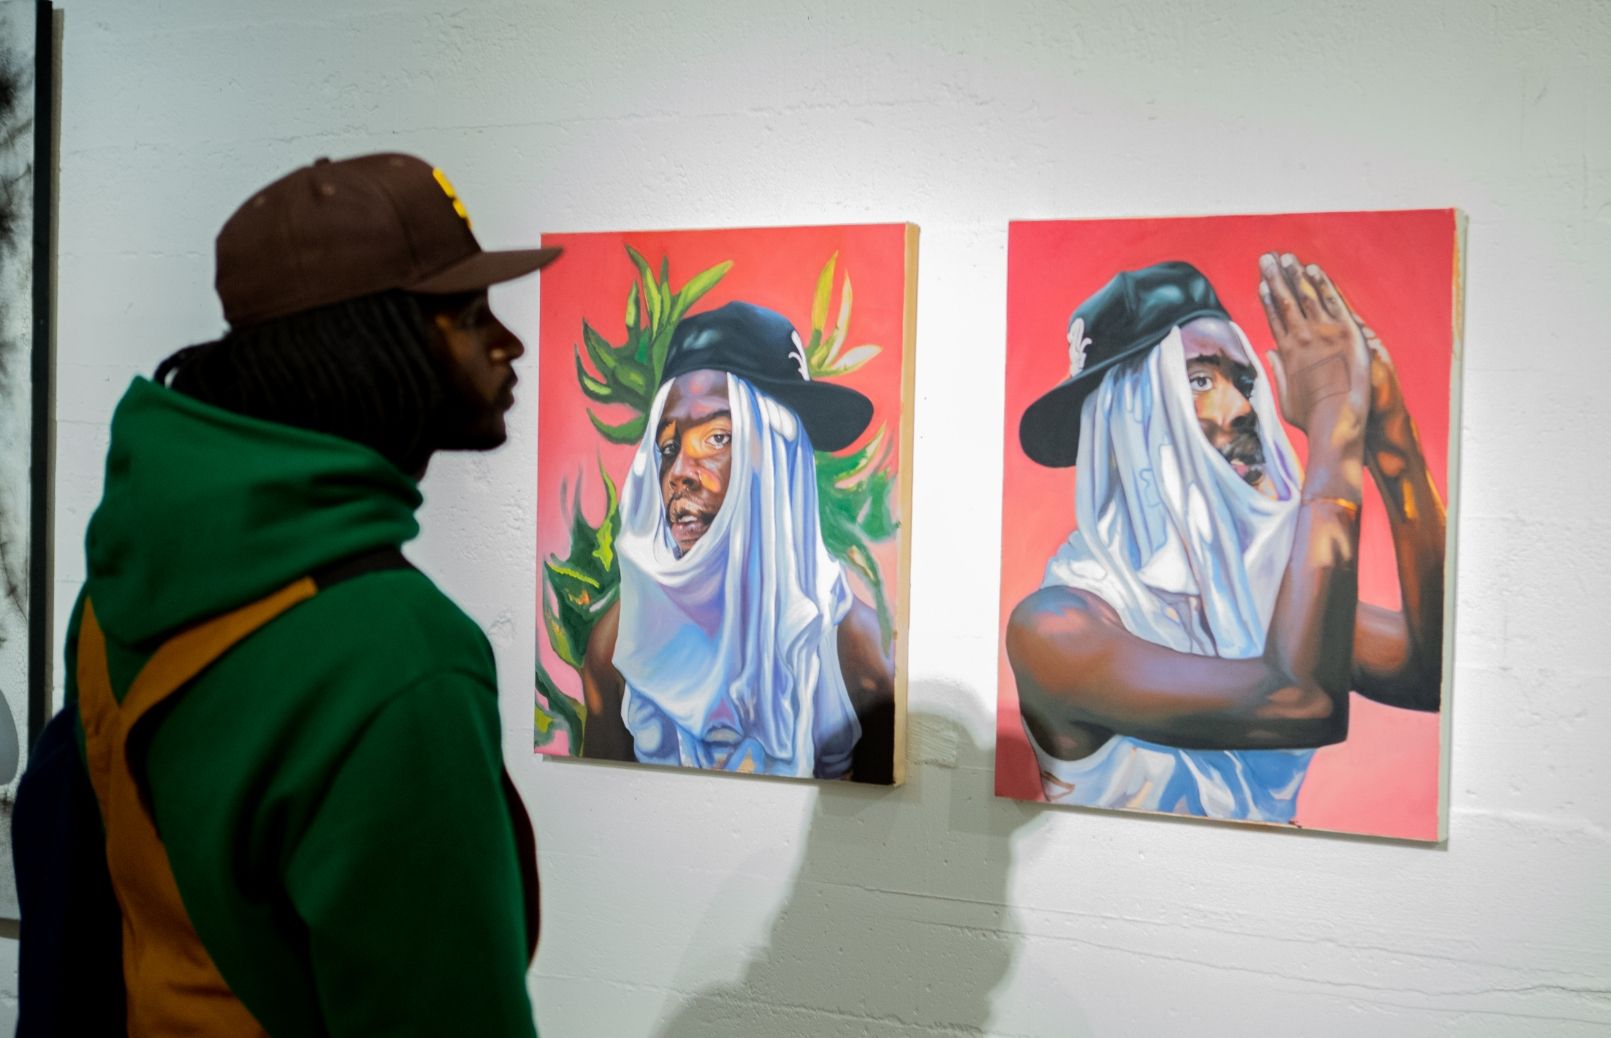 Man looks at two paintings on gallery wall of man with t-sirt and baseball hat on his head